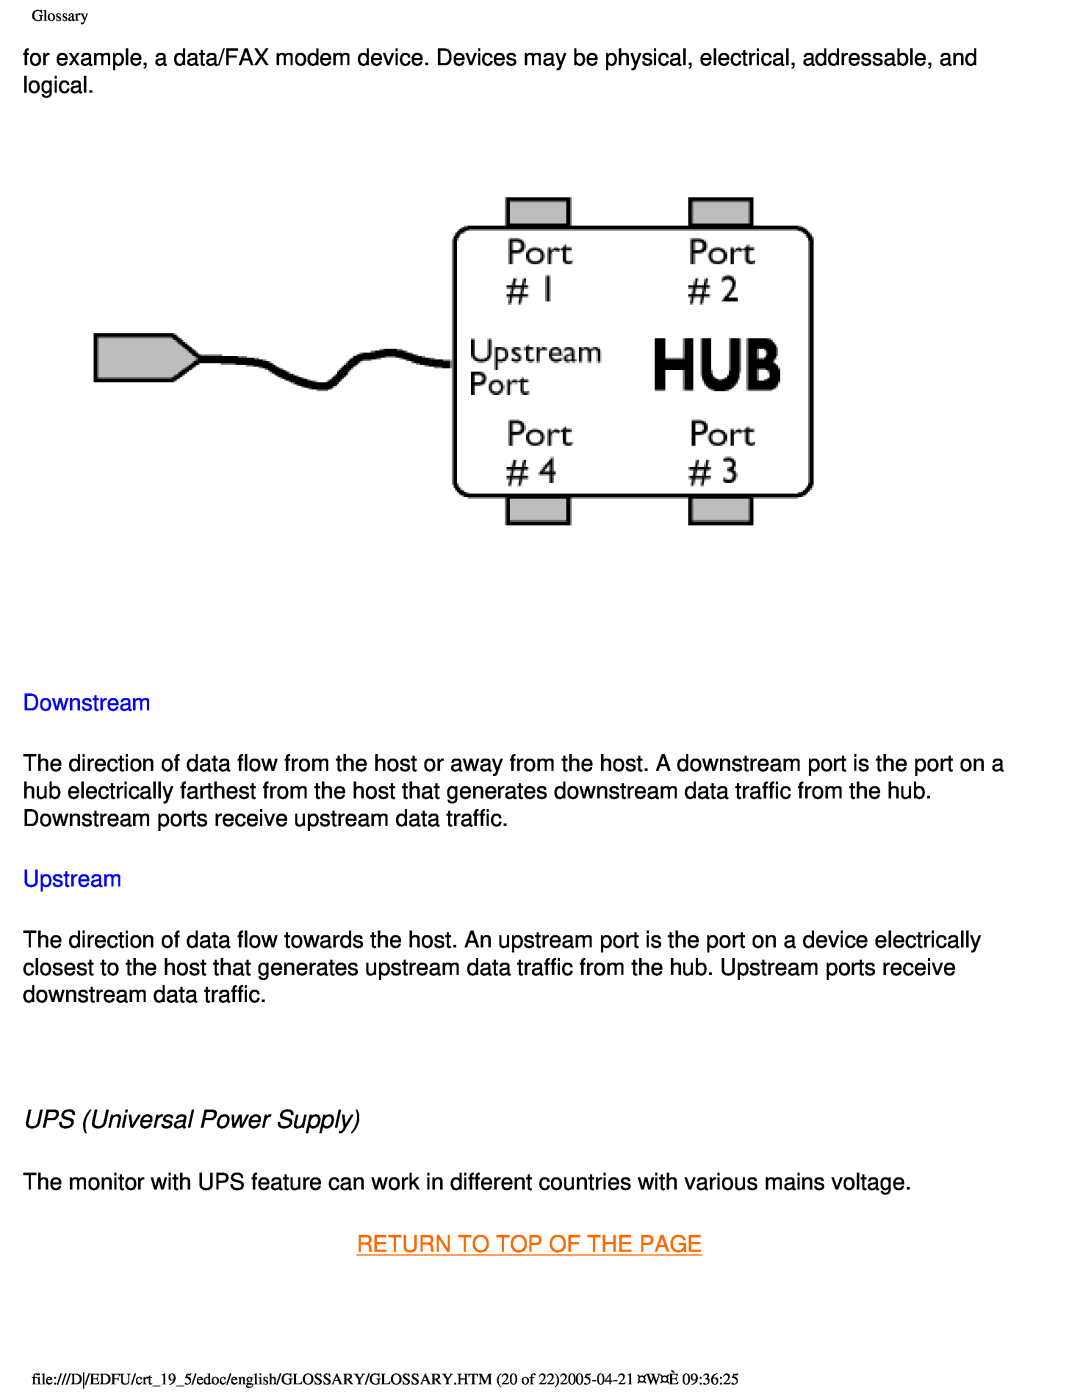 Philips 109F user manual UPS Universal Power Supply, Downstream, Upstream, Return To Top Of The Page 